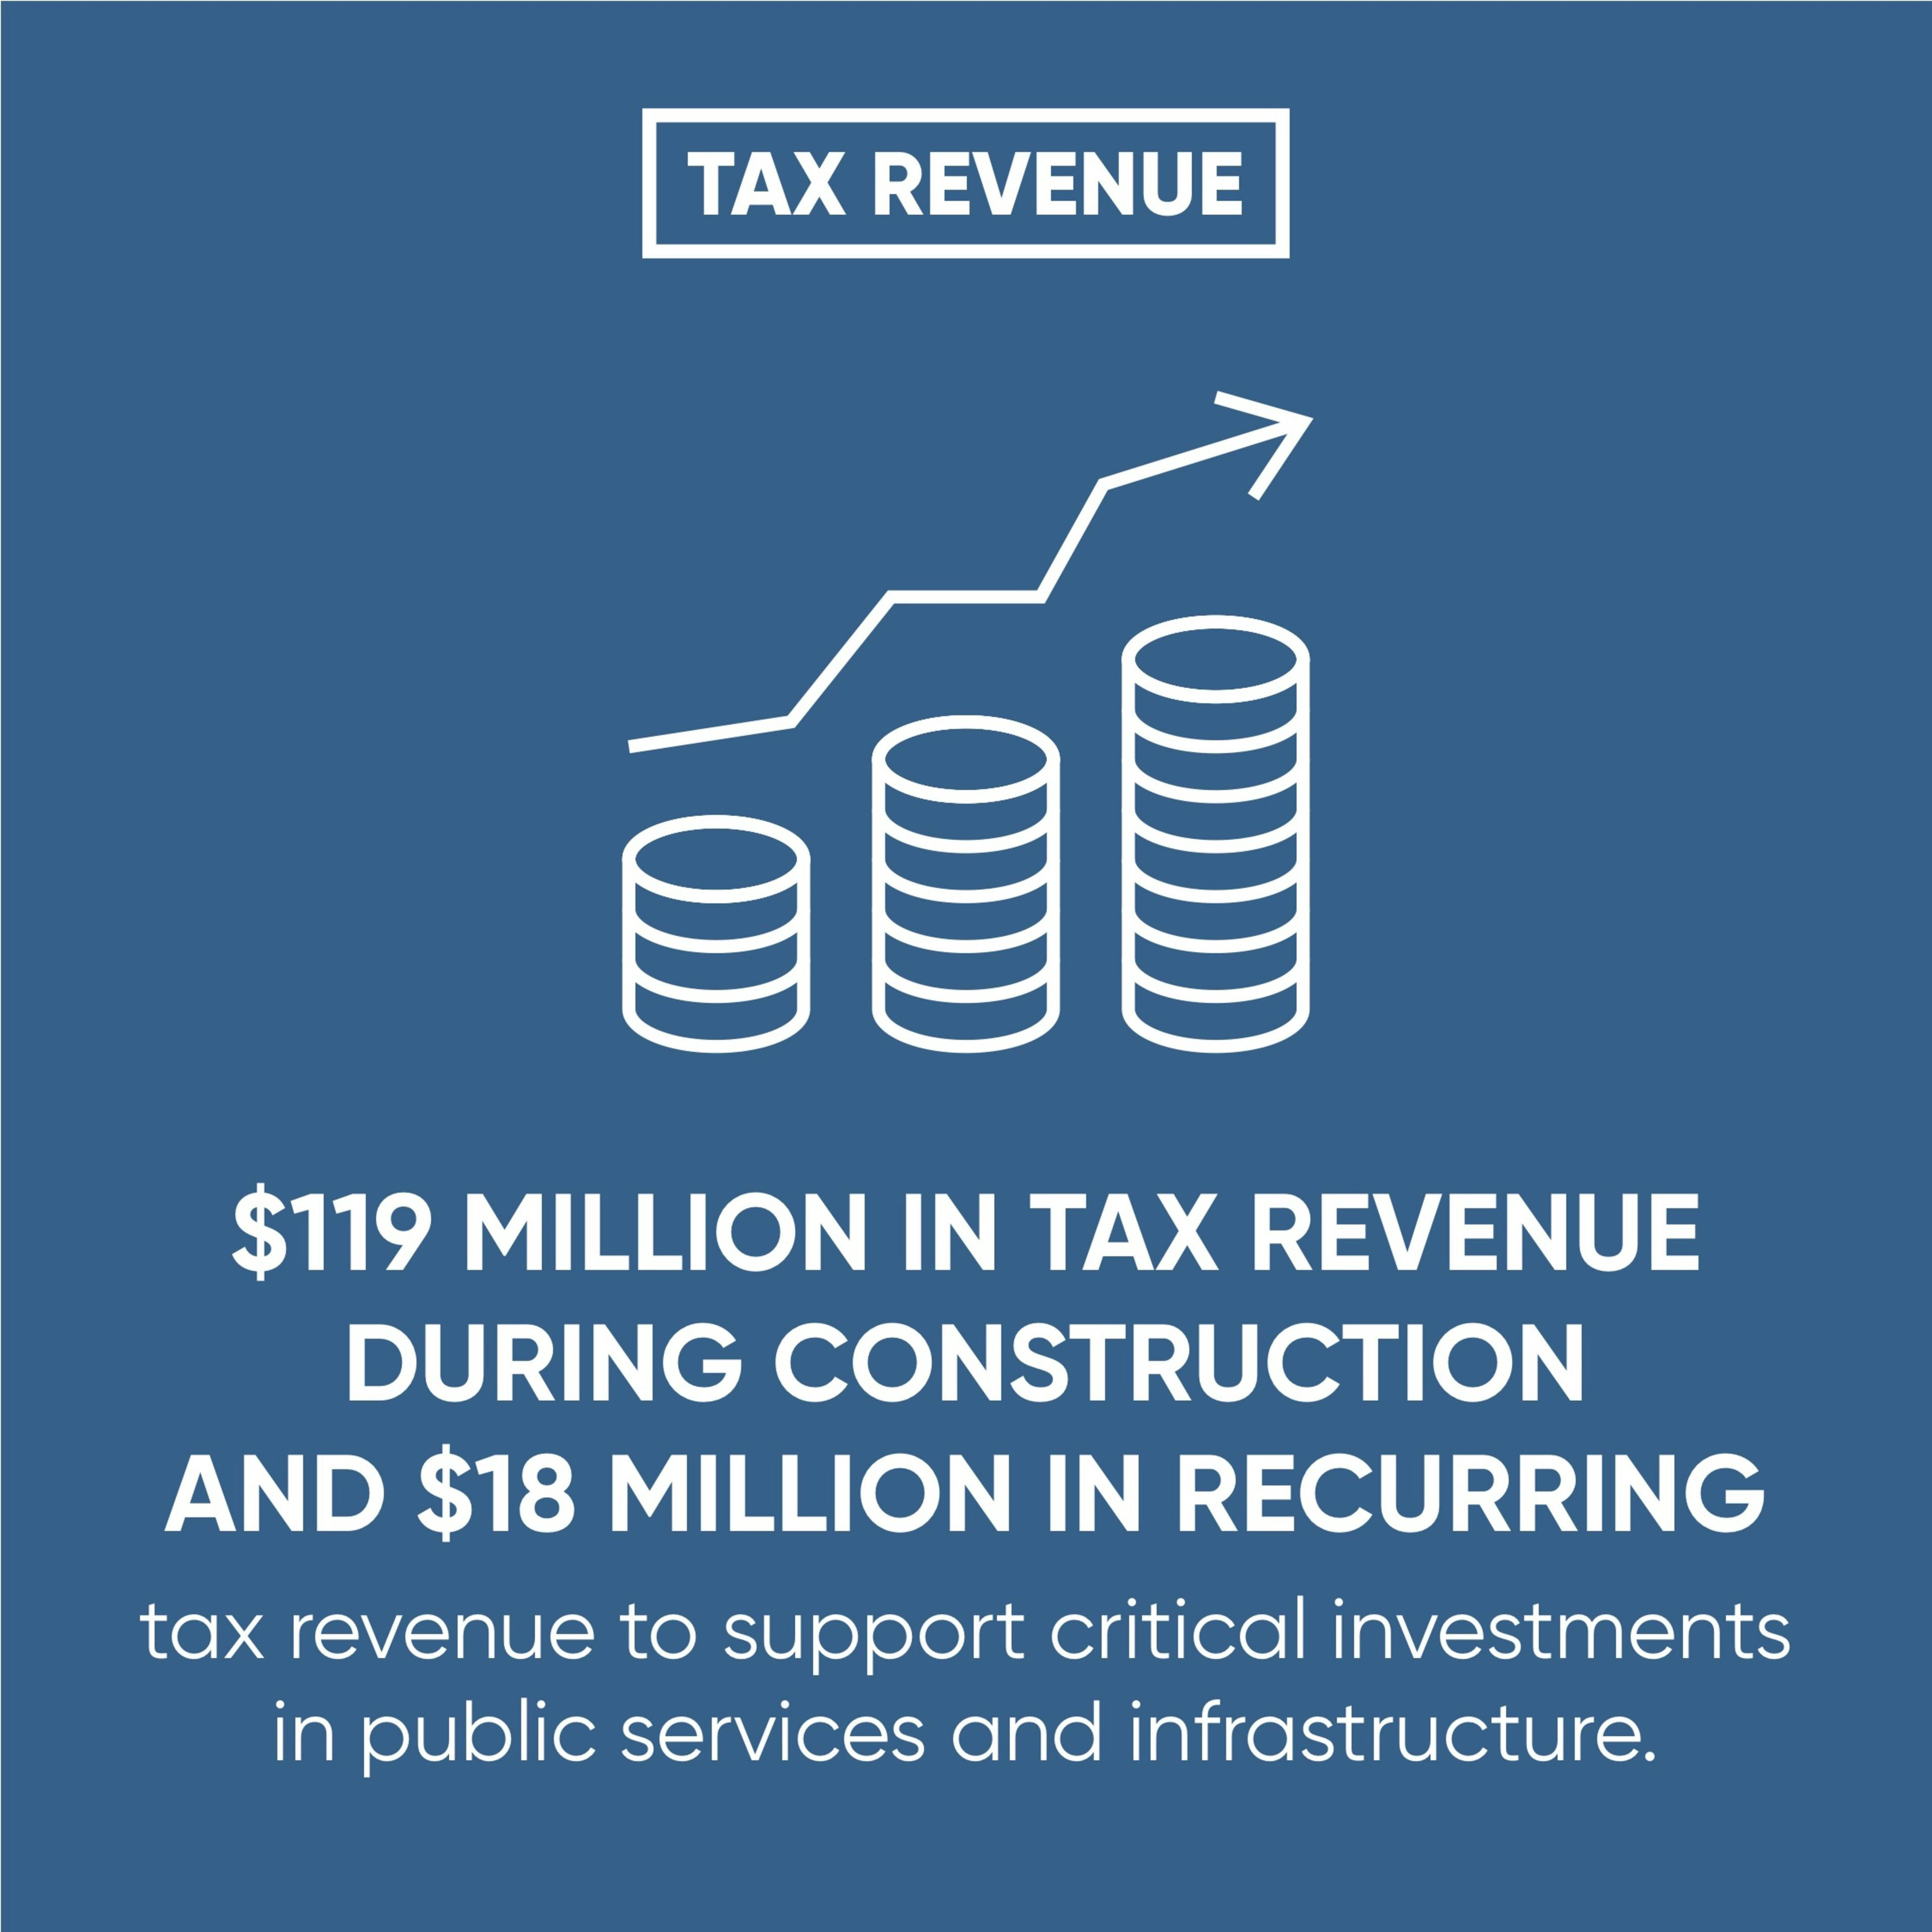 Infographic text: Tax Revenue. $119 Million in tax revenue during construction and $18 million in recurring tax revenue to support critical investments in public services and infrastructure.